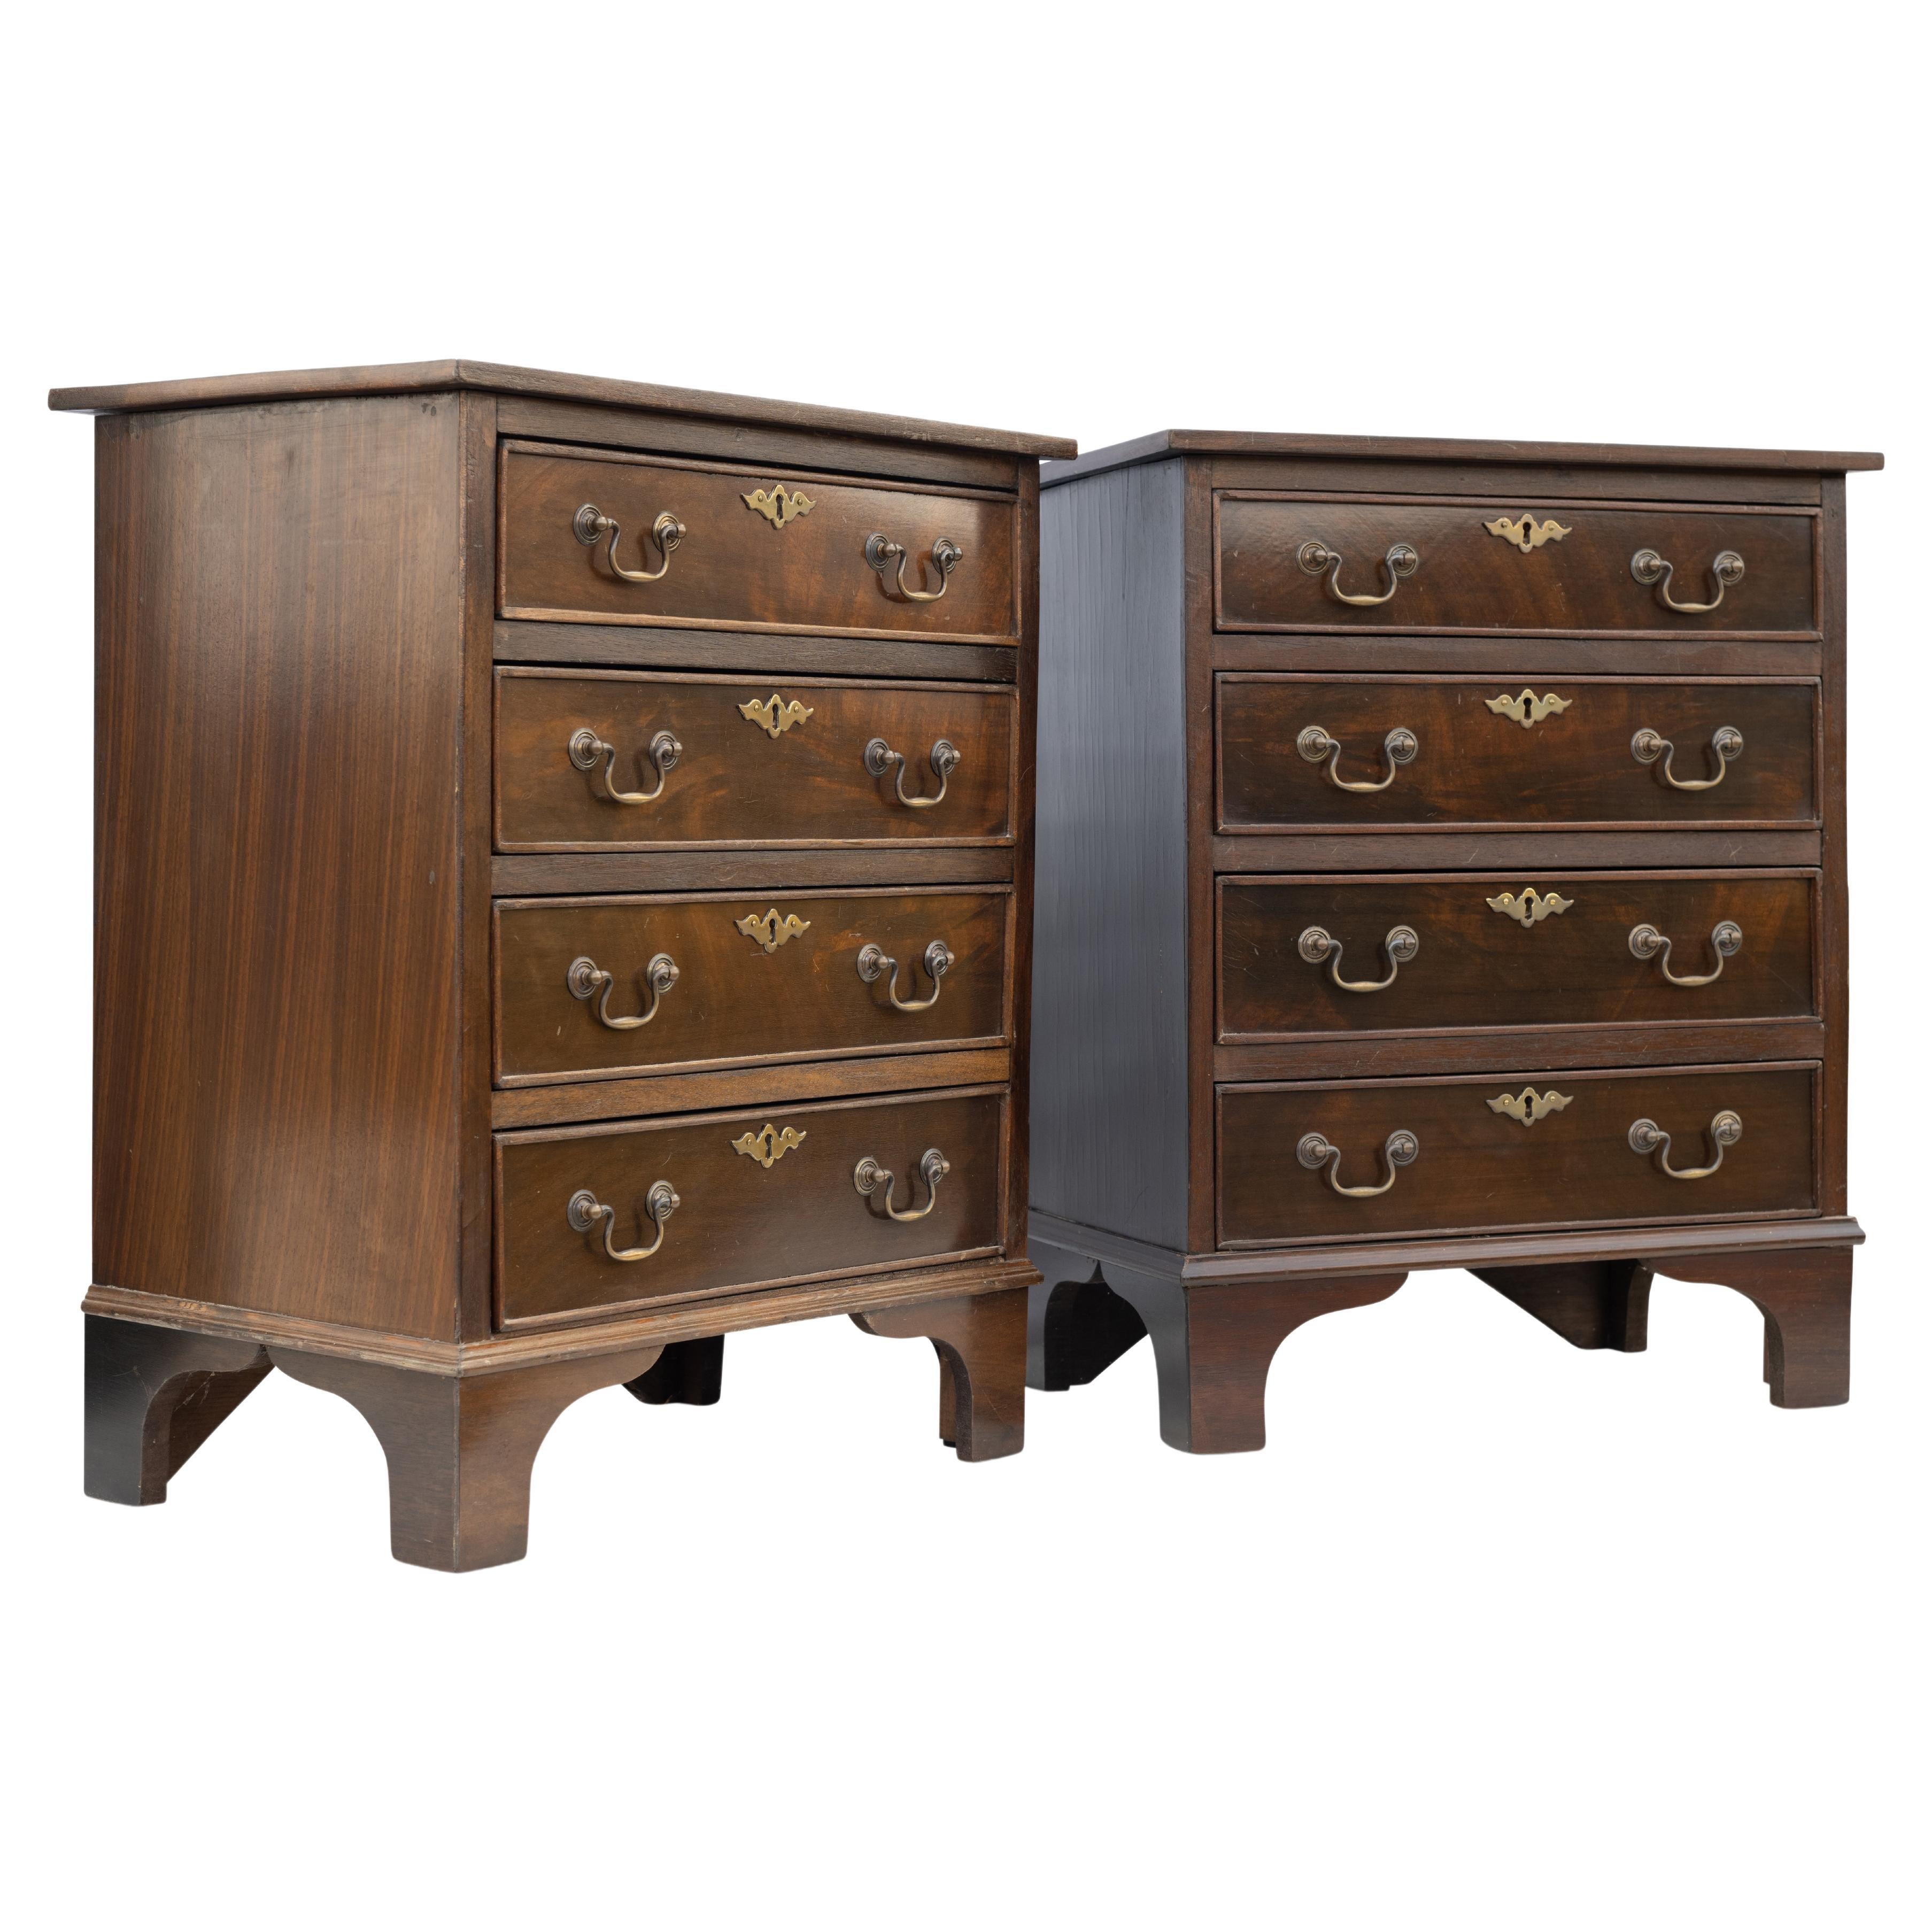 A Pair of Four Drawer Bedside Chests with Brass Handles of a Georgian Style.

